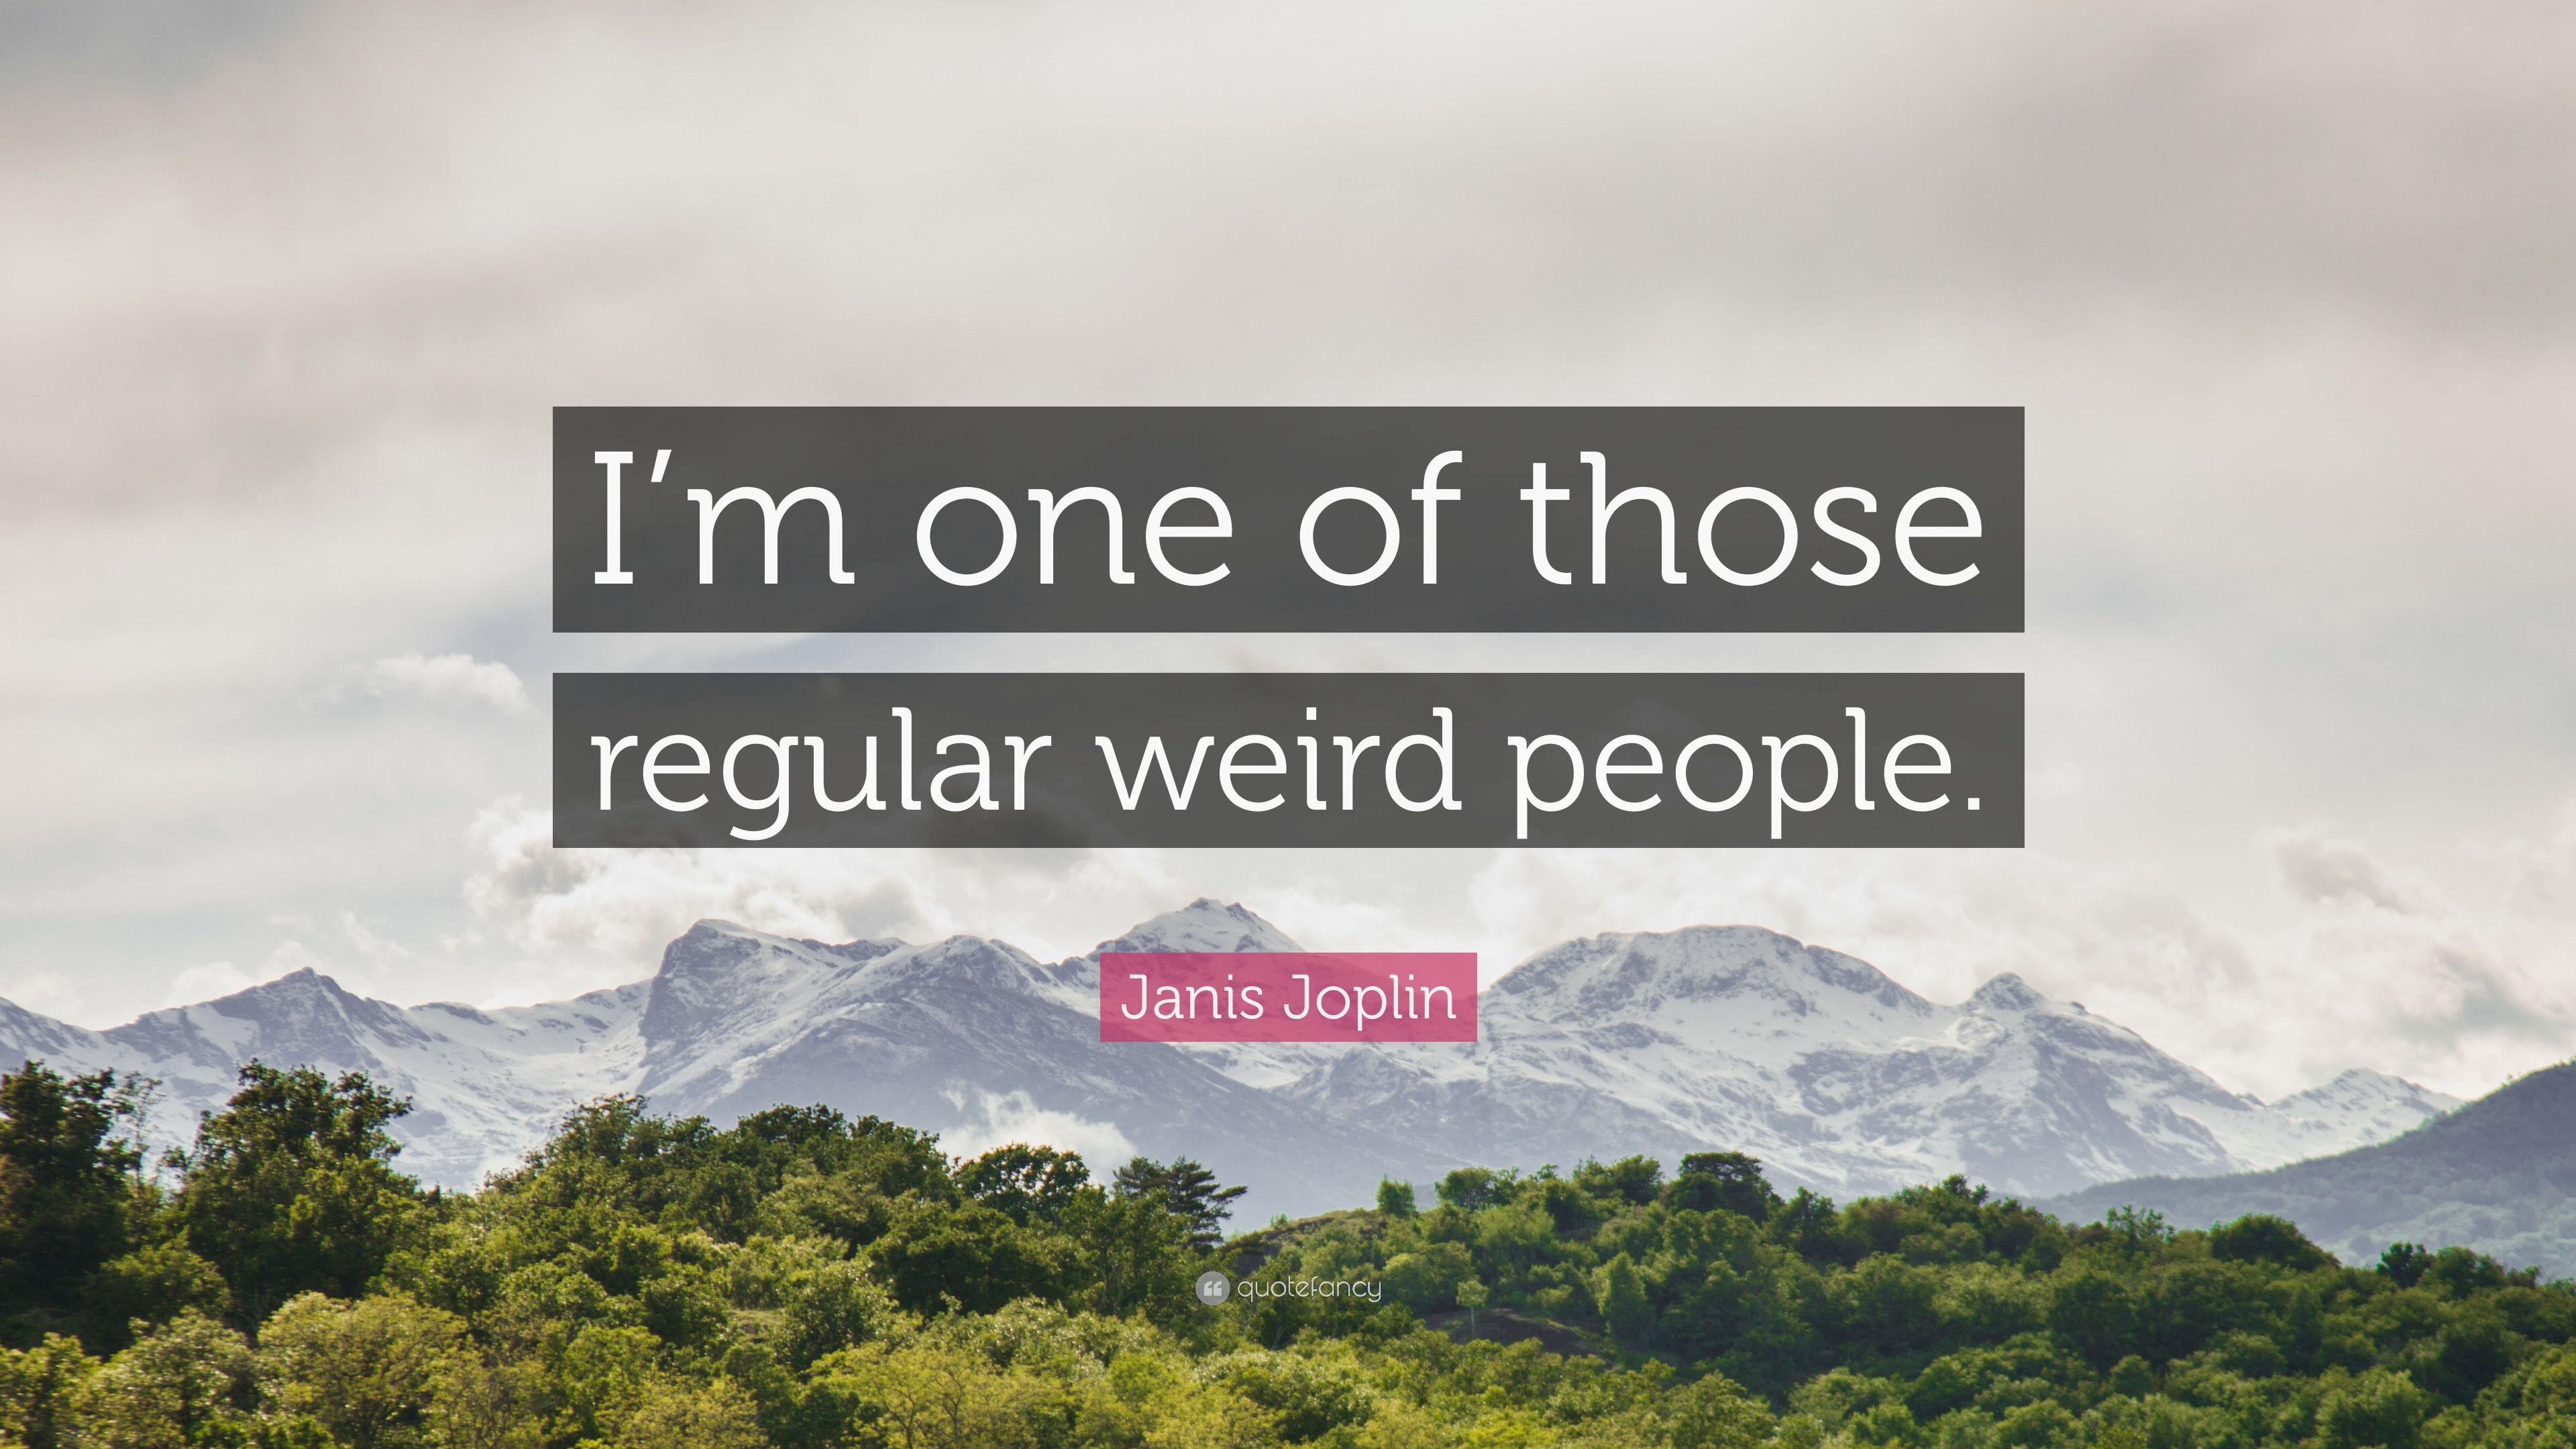 Janis Joplin Quote: “I'm one of those regular weird people.” 9